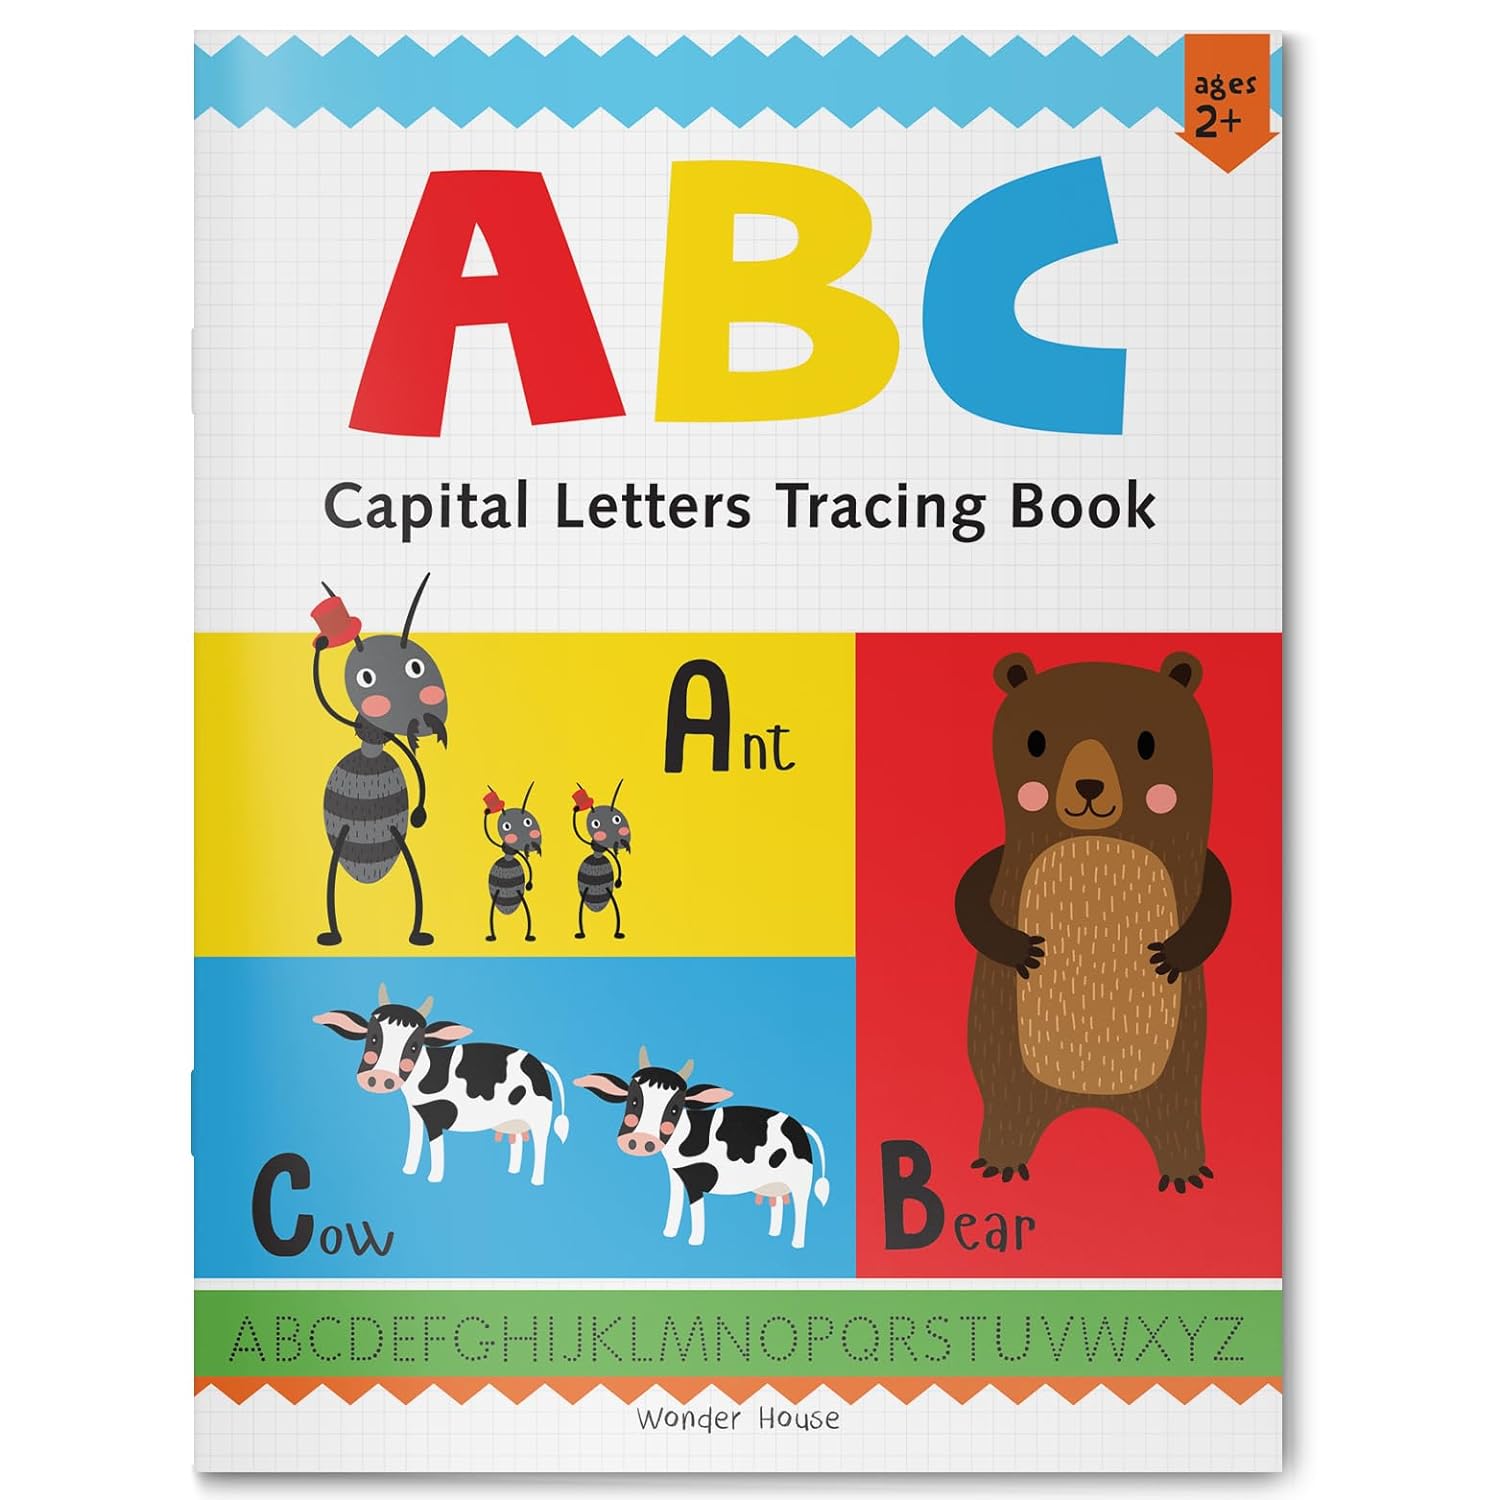 ABC - Capital Letters Tracing Book